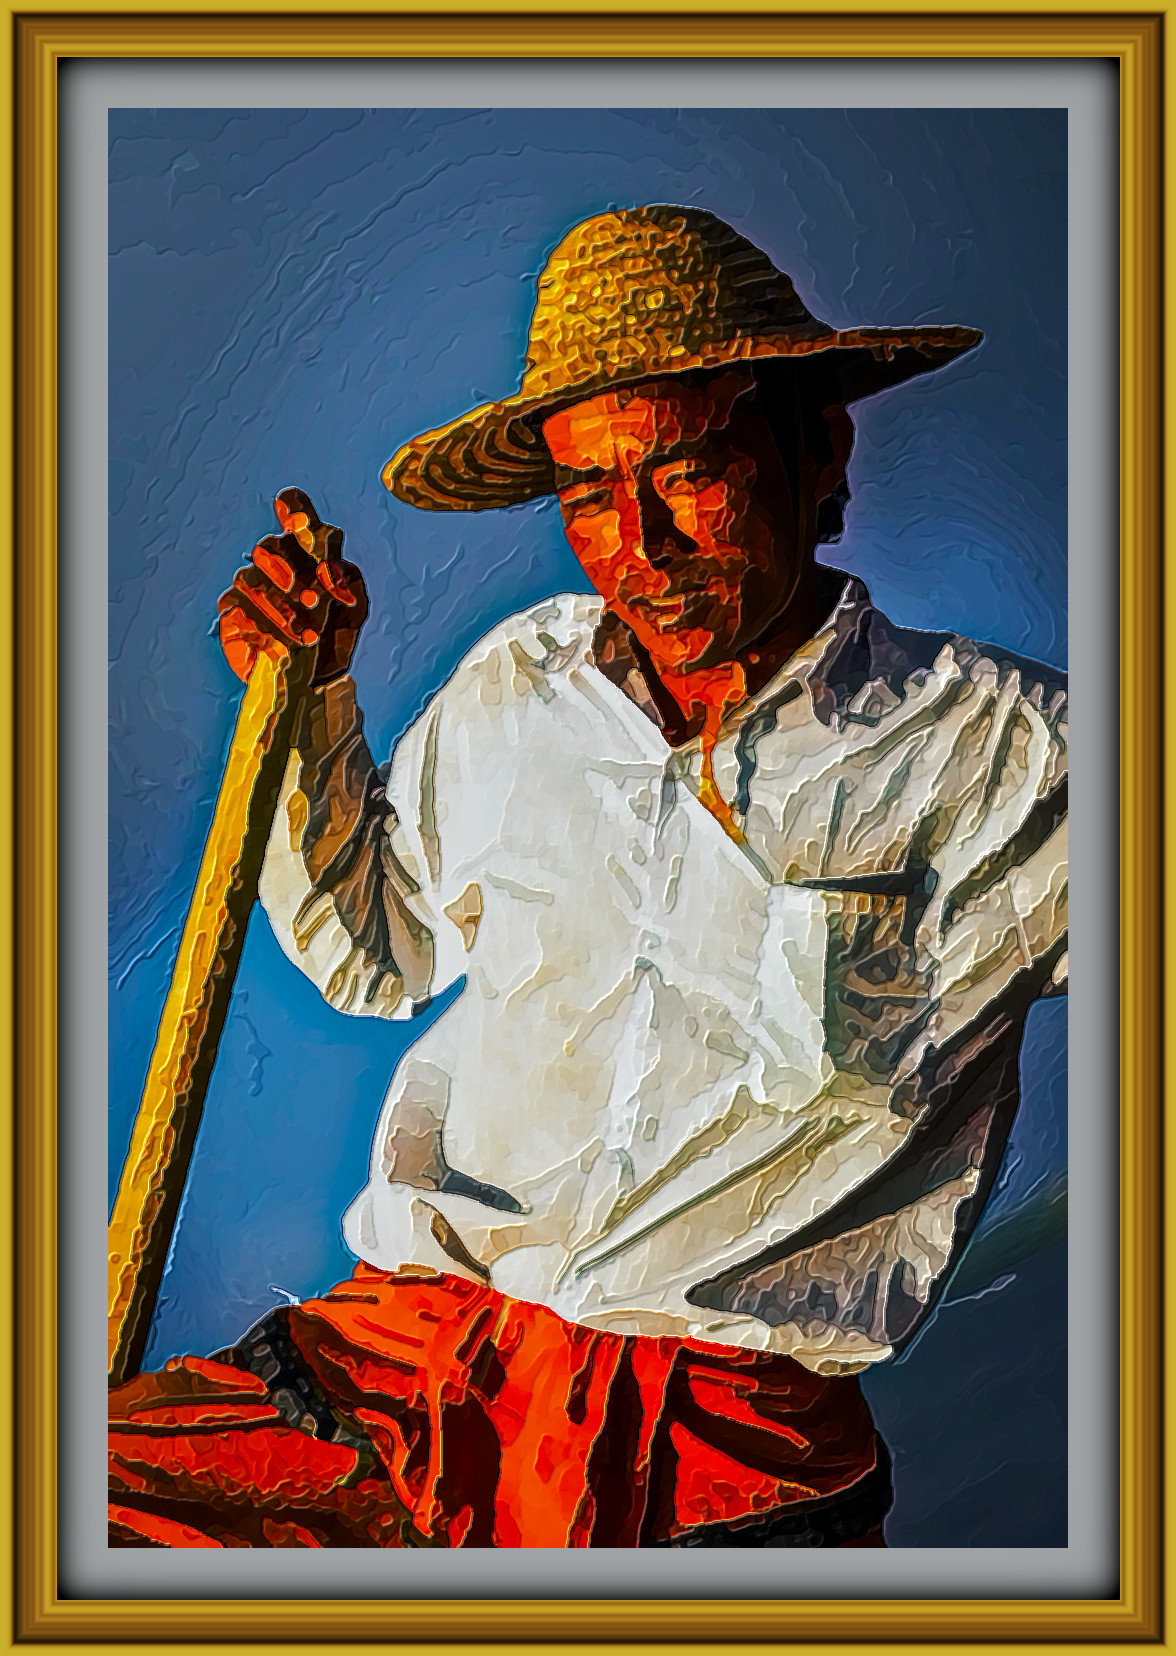 2024-02-15 10-16-42 Inle_Lake_Fisherman_Portrait_Myanmar_Colby_Brown with JVID Embossed Graphic Effect, parms=1, 127.0, 6.0, 8.0, 7.5, 9.95, 1.5, 0.0, 0.jpeg